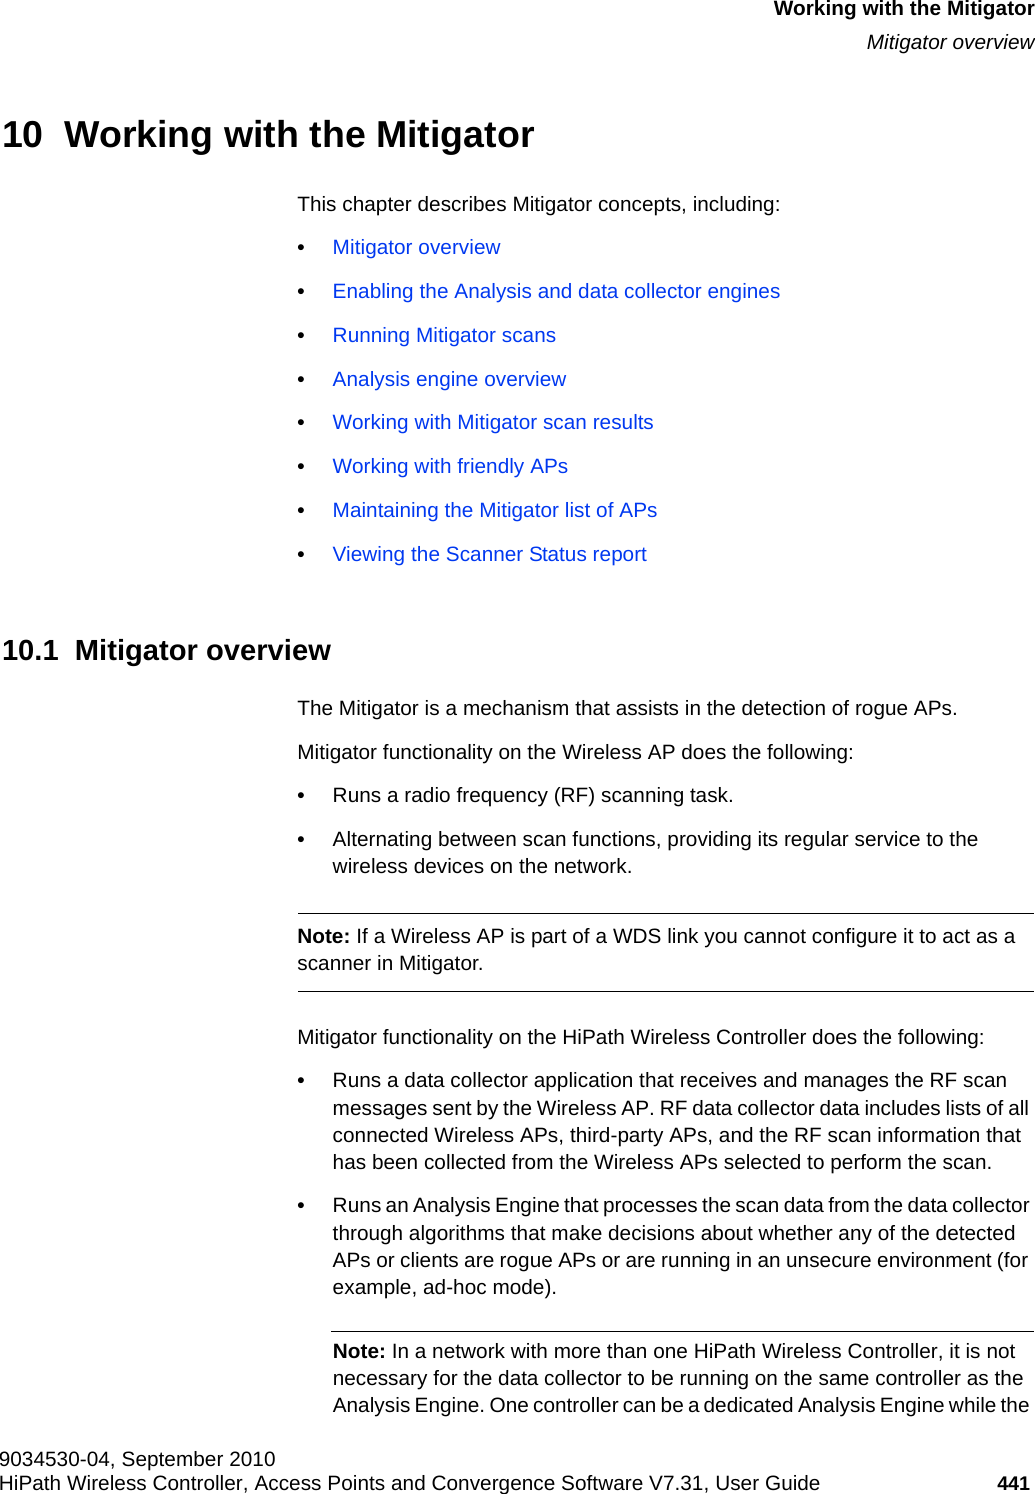 hwc_mitigator.fm9034530-04, September 2010HiPath Wireless Controller, Access Points and Convergence Software V7.31, User Guide 441      Working with the MitigatorMitigator overview10  Working with the MitigatorThis chapter describes Mitigator concepts, including:•Mitigator overview•Enabling the Analysis and data collector engines•Running Mitigator scans•Analysis engine overview•Working with Mitigator scan results•Working with friendly APs•Maintaining the Mitigator list of APs•Viewing the Scanner Status report10.1  Mitigator overviewThe Mitigator is a mechanism that assists in the detection of rogue APs. Mitigator functionality on the Wireless AP does the following:•Runs a radio frequency (RF) scanning task. •Alternating between scan functions, providing its regular service to the wireless devices on the network.Note: If a Wireless AP is part of a WDS link you cannot configure it to act as a scanner in Mitigator. Mitigator functionality on the HiPath Wireless Controller does the following:•Runs a data collector application that receives and manages the RF scan messages sent by the Wireless AP. RF data collector data includes lists of all connected Wireless APs, third-party APs, and the RF scan information that has been collected from the Wireless APs selected to perform the scan. •Runs an Analysis Engine that processes the scan data from the data collector through algorithms that make decisions about whether any of the detected APs or clients are rogue APs or are running in an unsecure environment (for example, ad-hoc mode).Note: In a network with more than one HiPath Wireless Controller, it is not necessary for the data collector to be running on the same controller as the Analysis Engine. One controller can be a dedicated Analysis Engine while the 